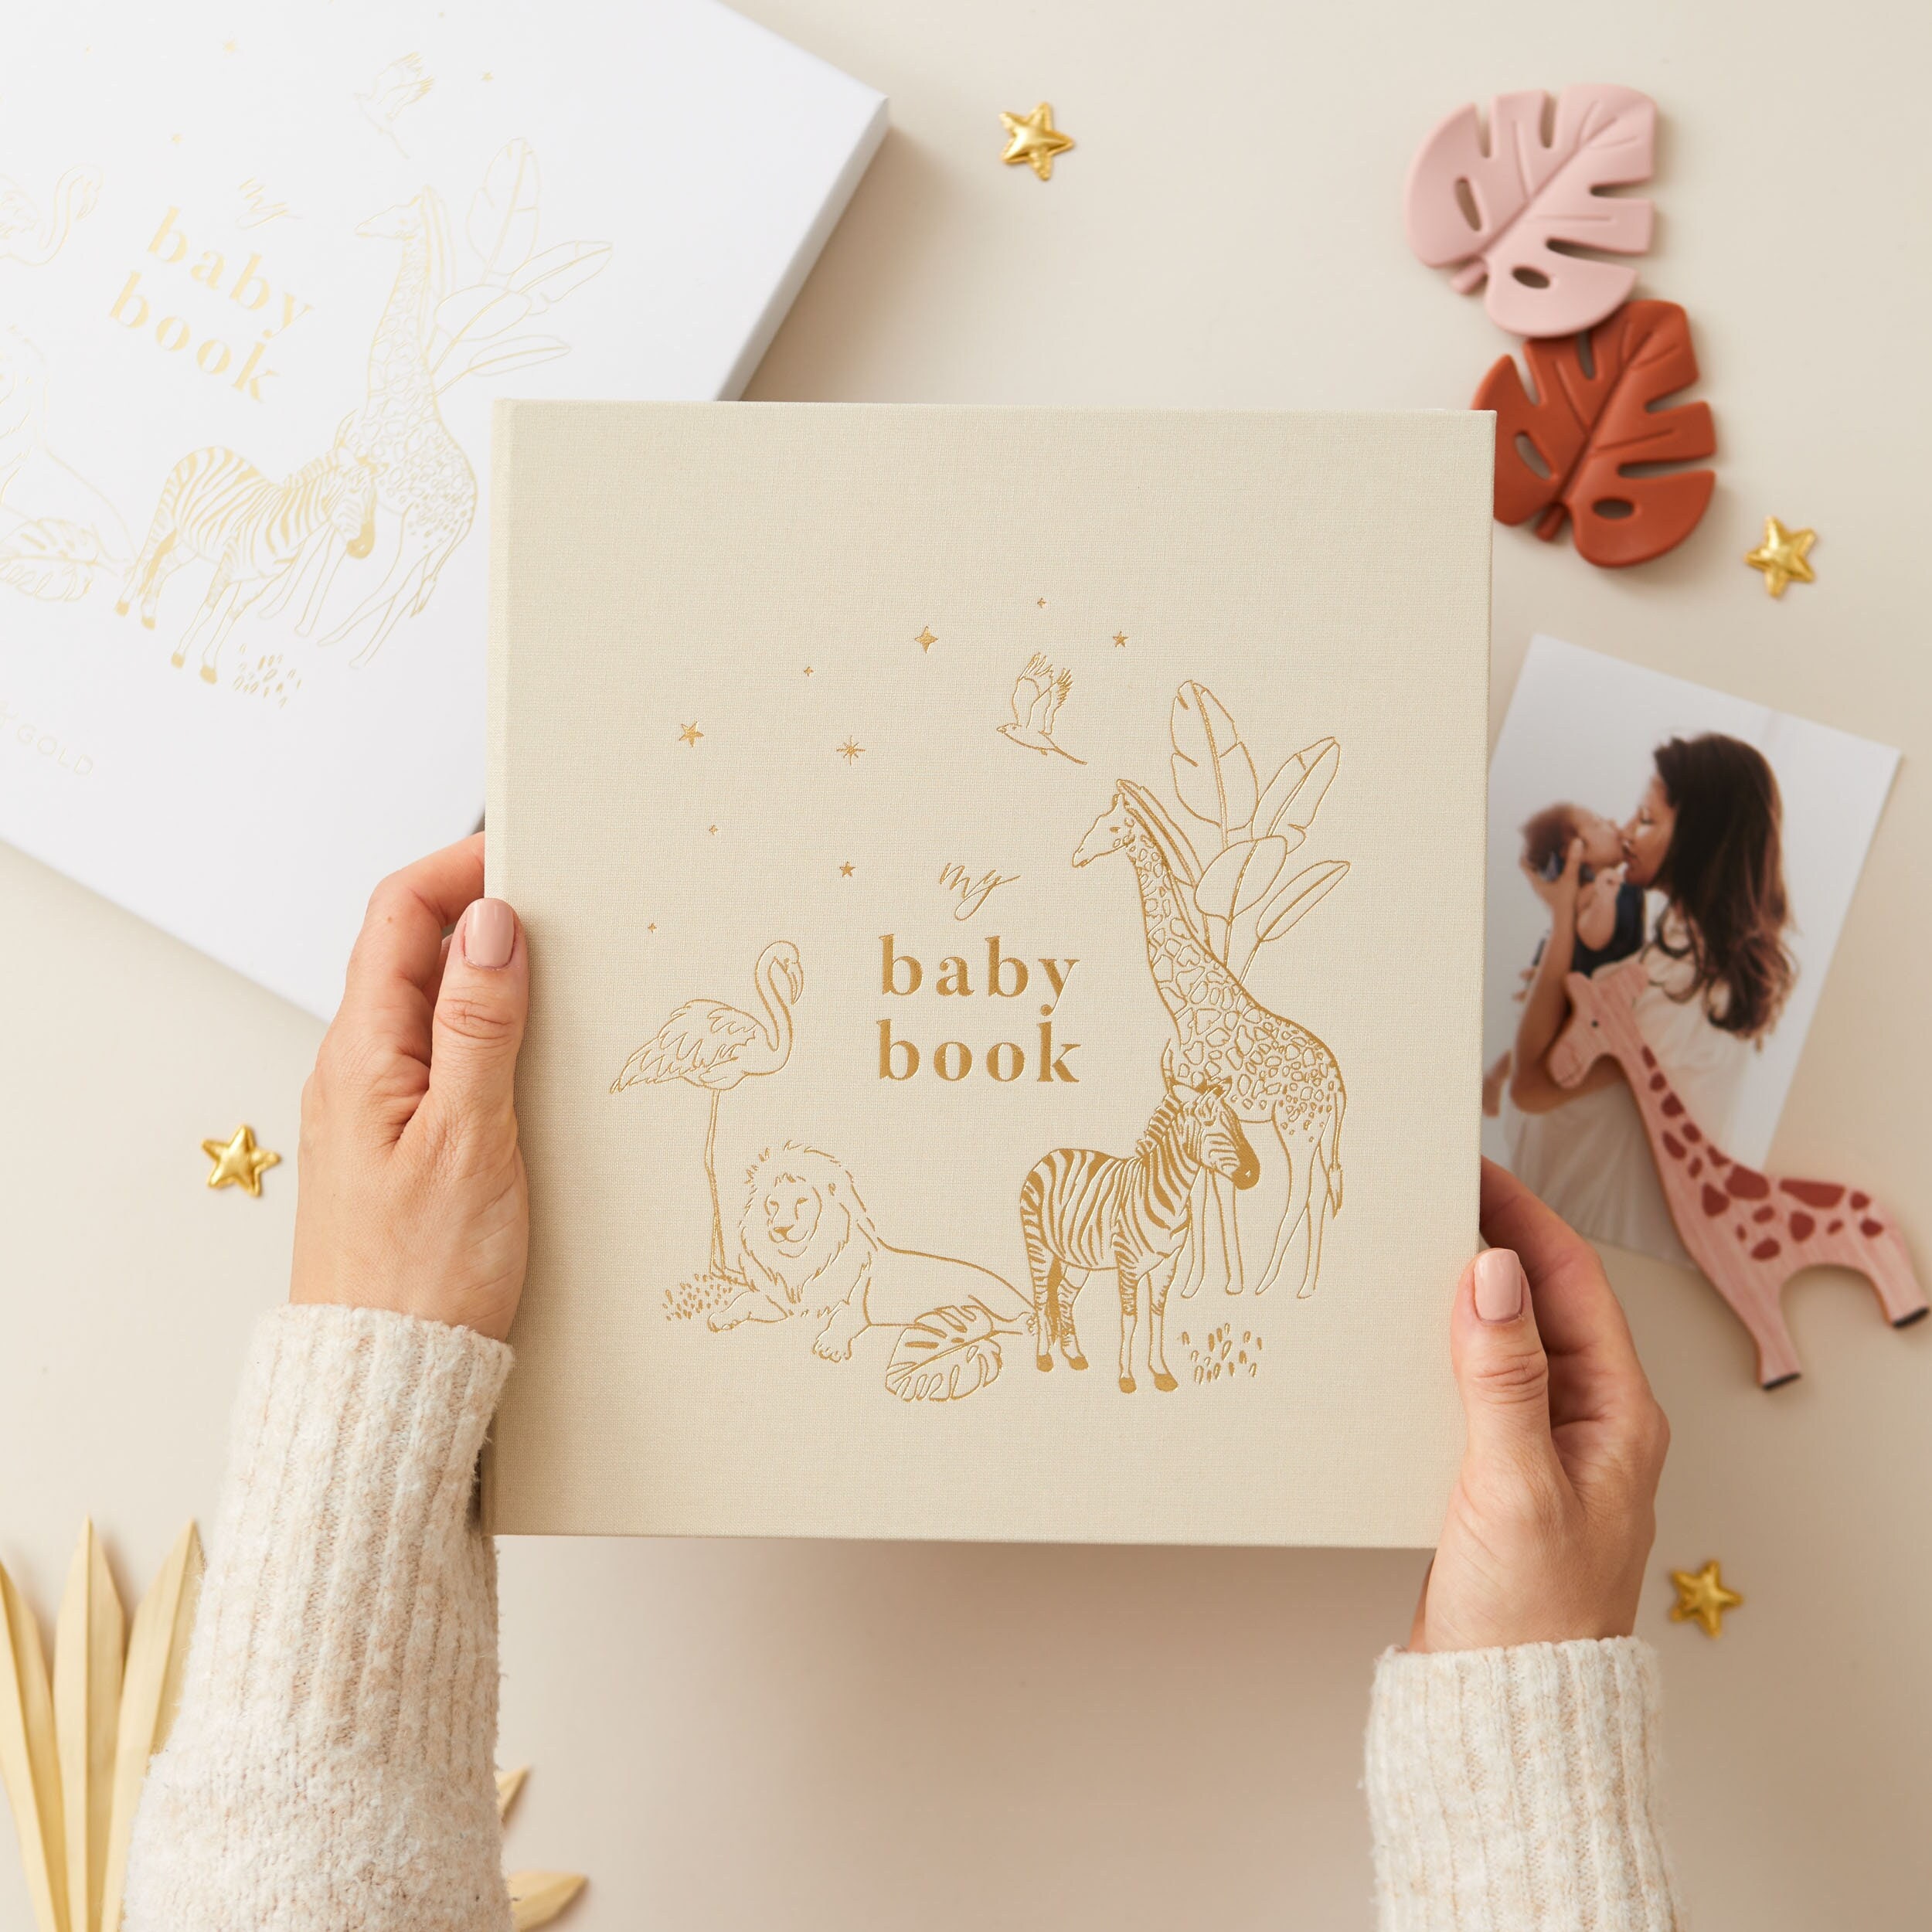 Make Your Own Baby Book - Baby Memory Books & Photo Albums